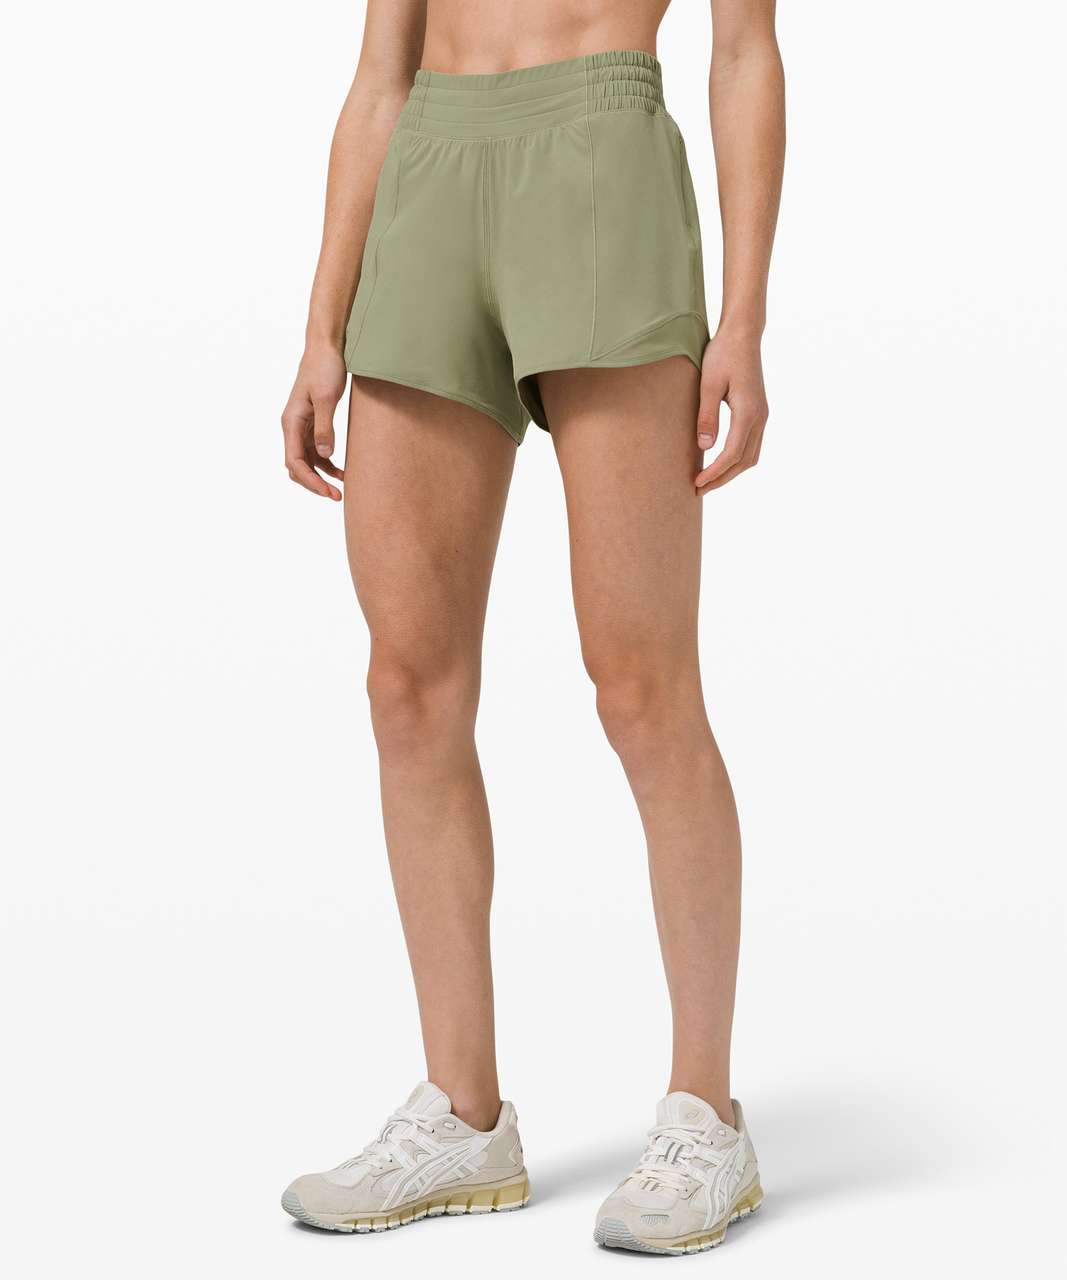 Lululemon Hotty Hot Low-rise Lined Shorts 4 In Heritage 365 Camo Dusky  Lavender /army Green